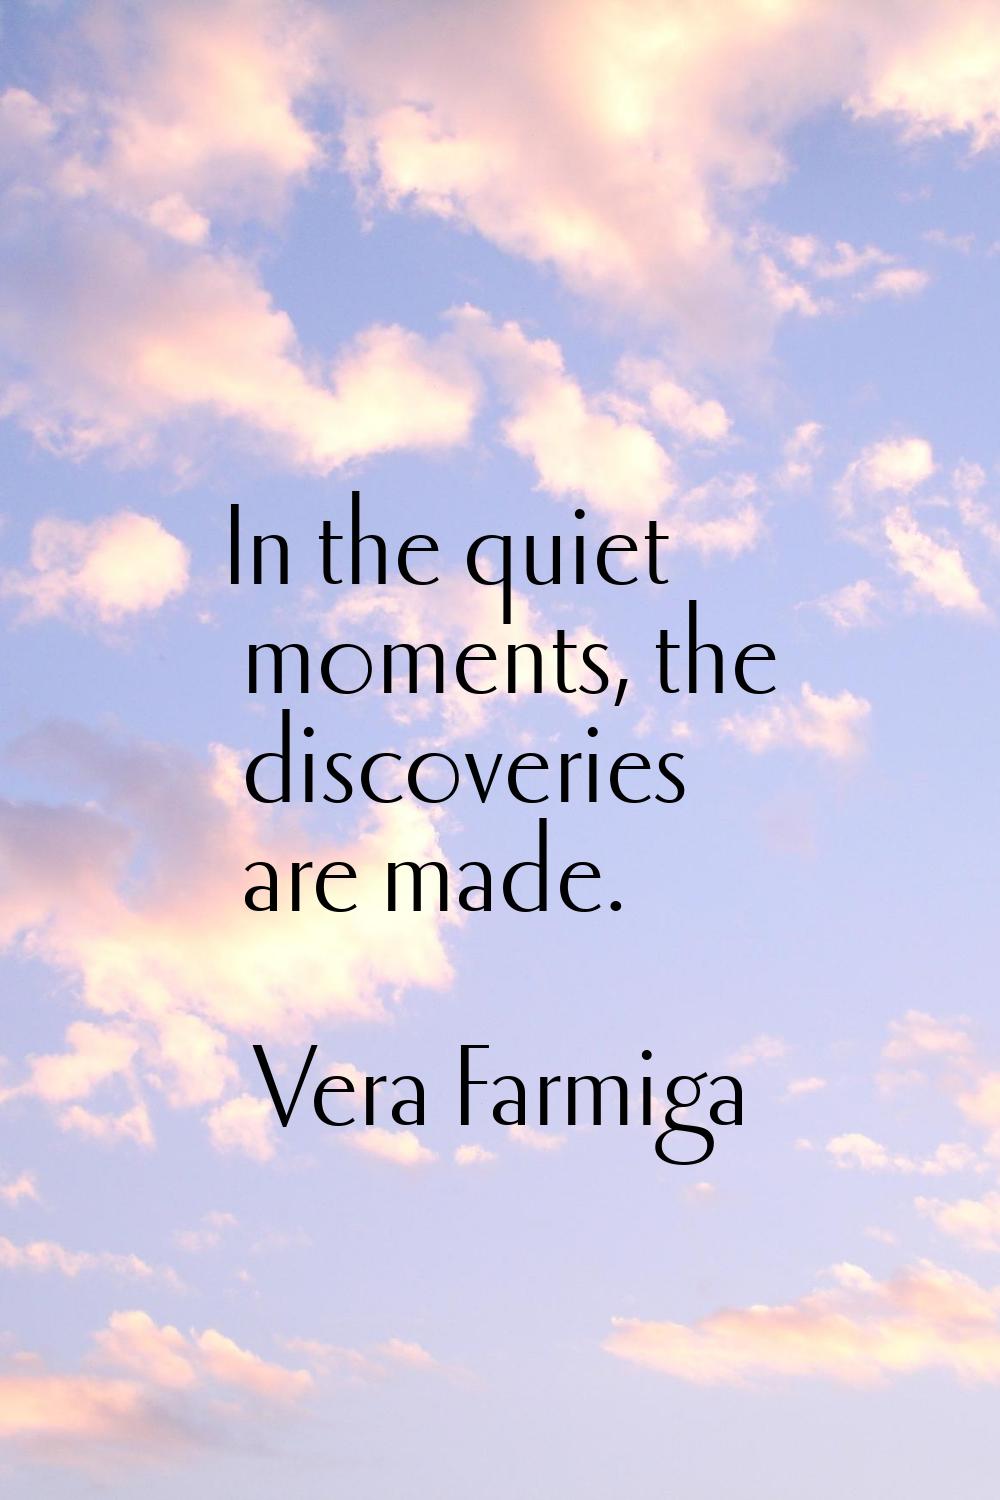 In the quiet moments, the discoveries are made.